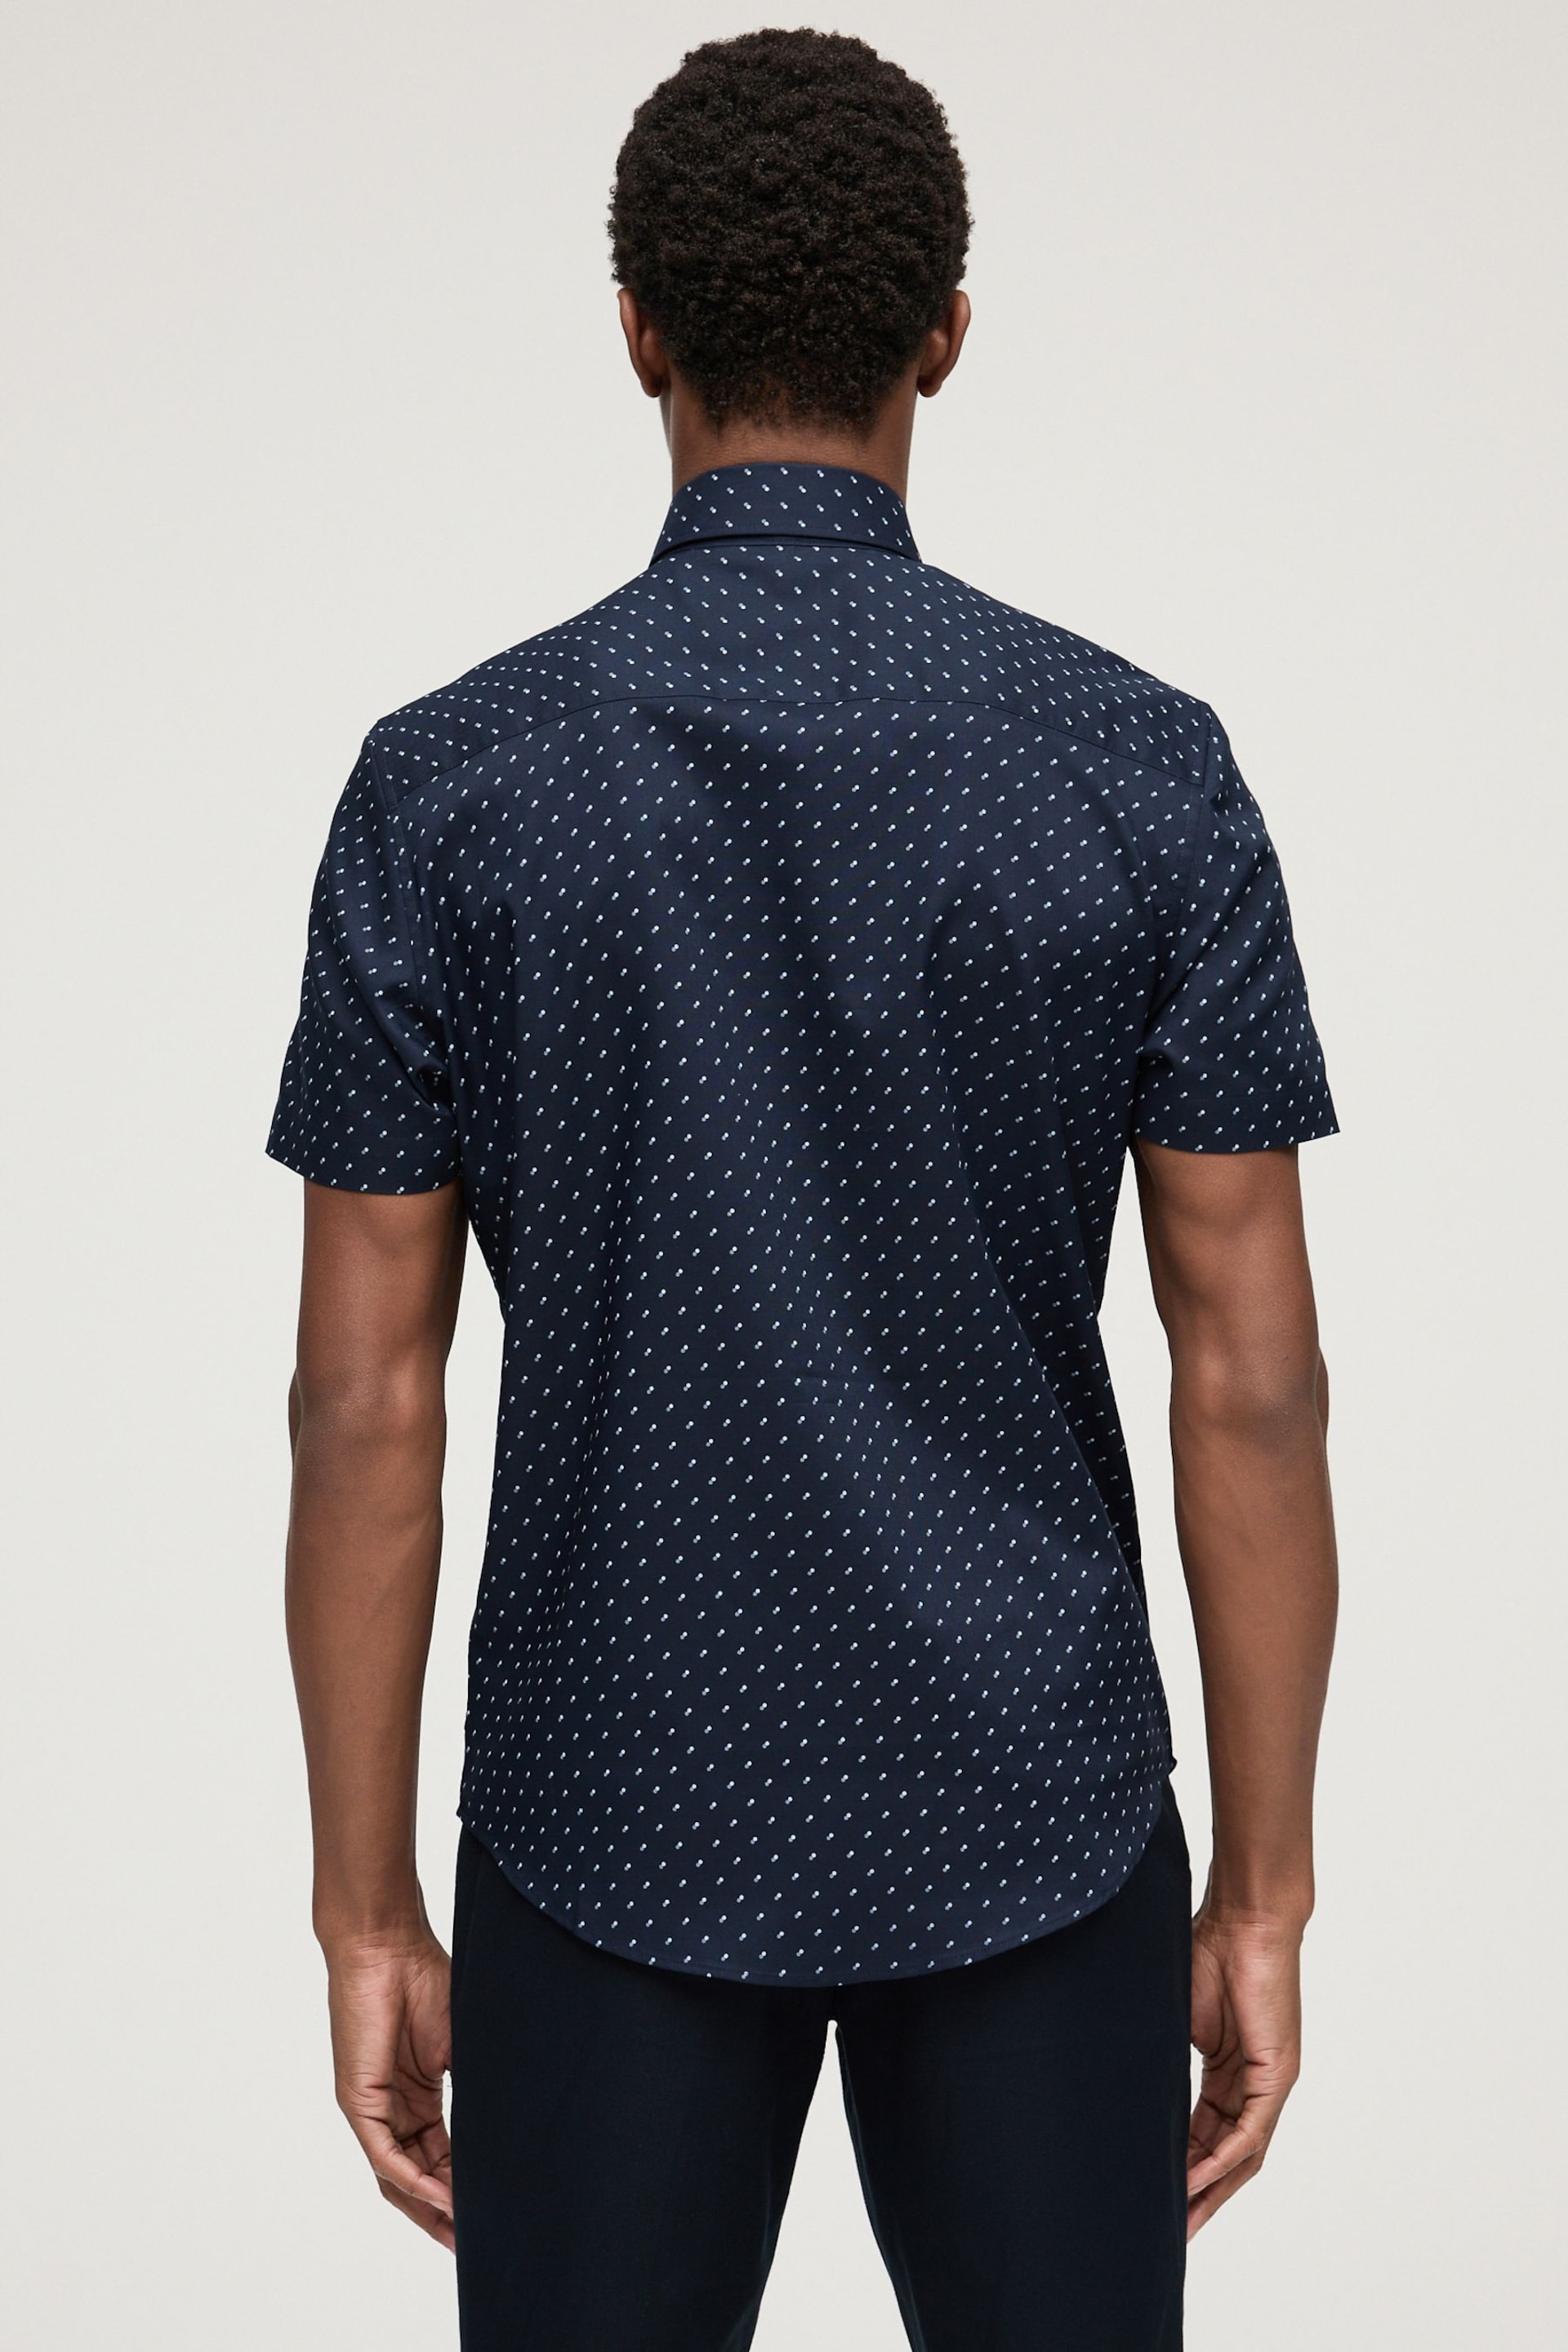 Navy Blue Easy Iron Button Down Short Sleeve Oxford Shirt - Image 6 of 7